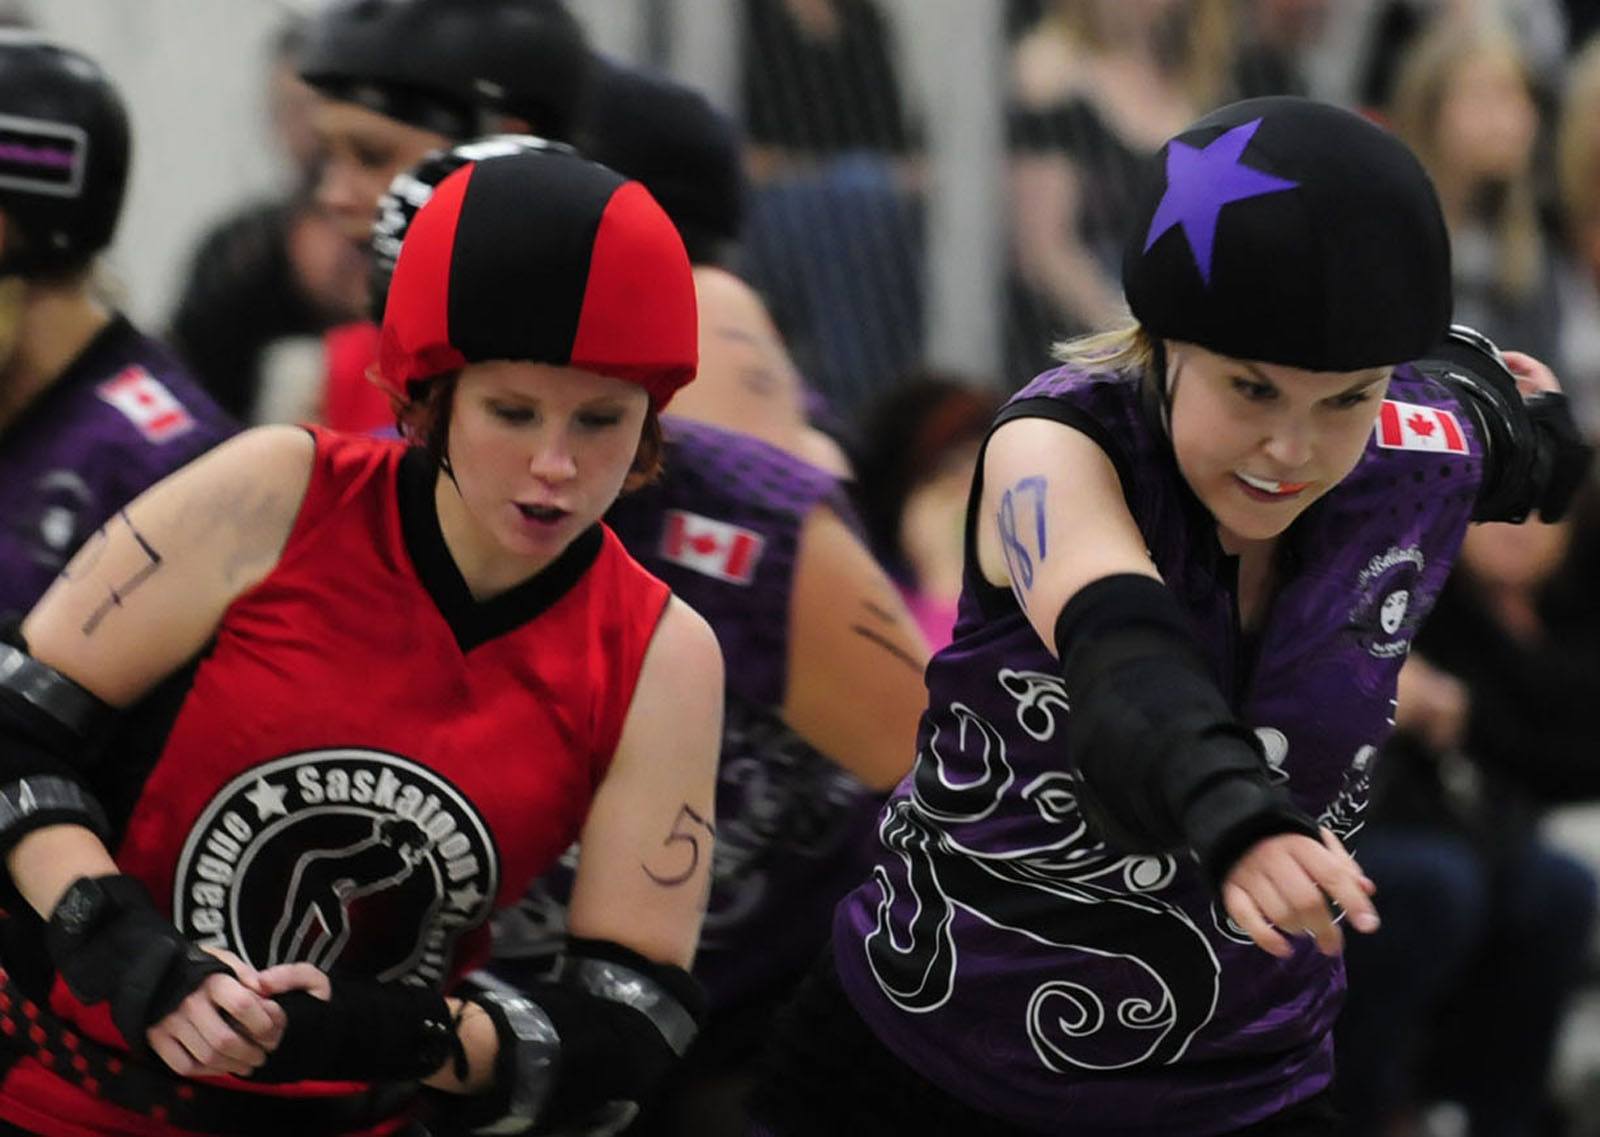 Red Deer Belladonna Hollywood Homicide skates past Dirty Devil of the Saskatoon Roller Derby League during the Summer Grudgen bout Saturday evening at the Westerner. The Belladonnas came out victorious with a final score of 233 to 72.